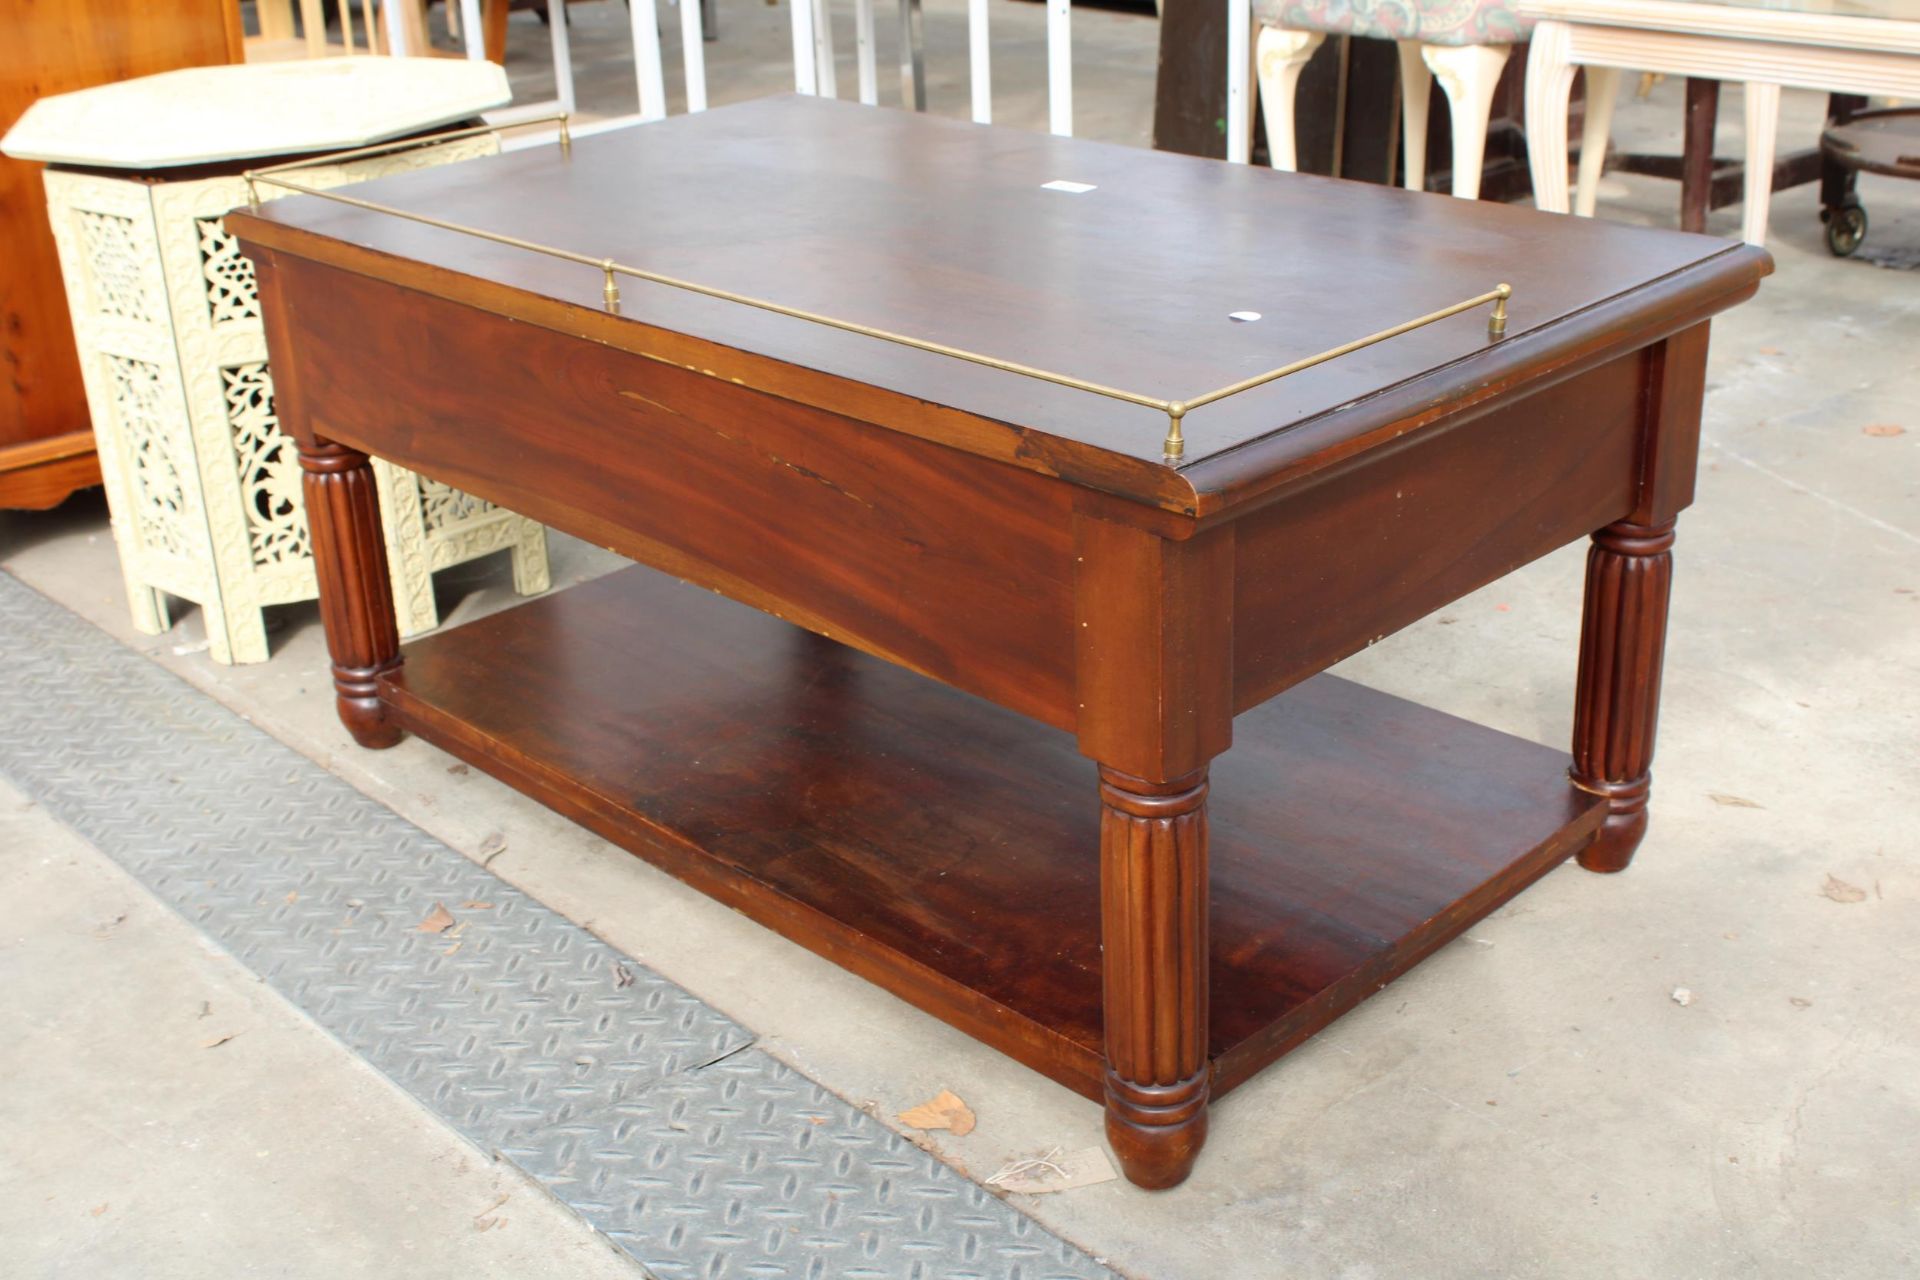 A MODERN HARDWOOD LOW SIDE TABLE WITH TWO DRAWERS AND BRASS GALLERY, 39" WIDE - Image 4 of 4